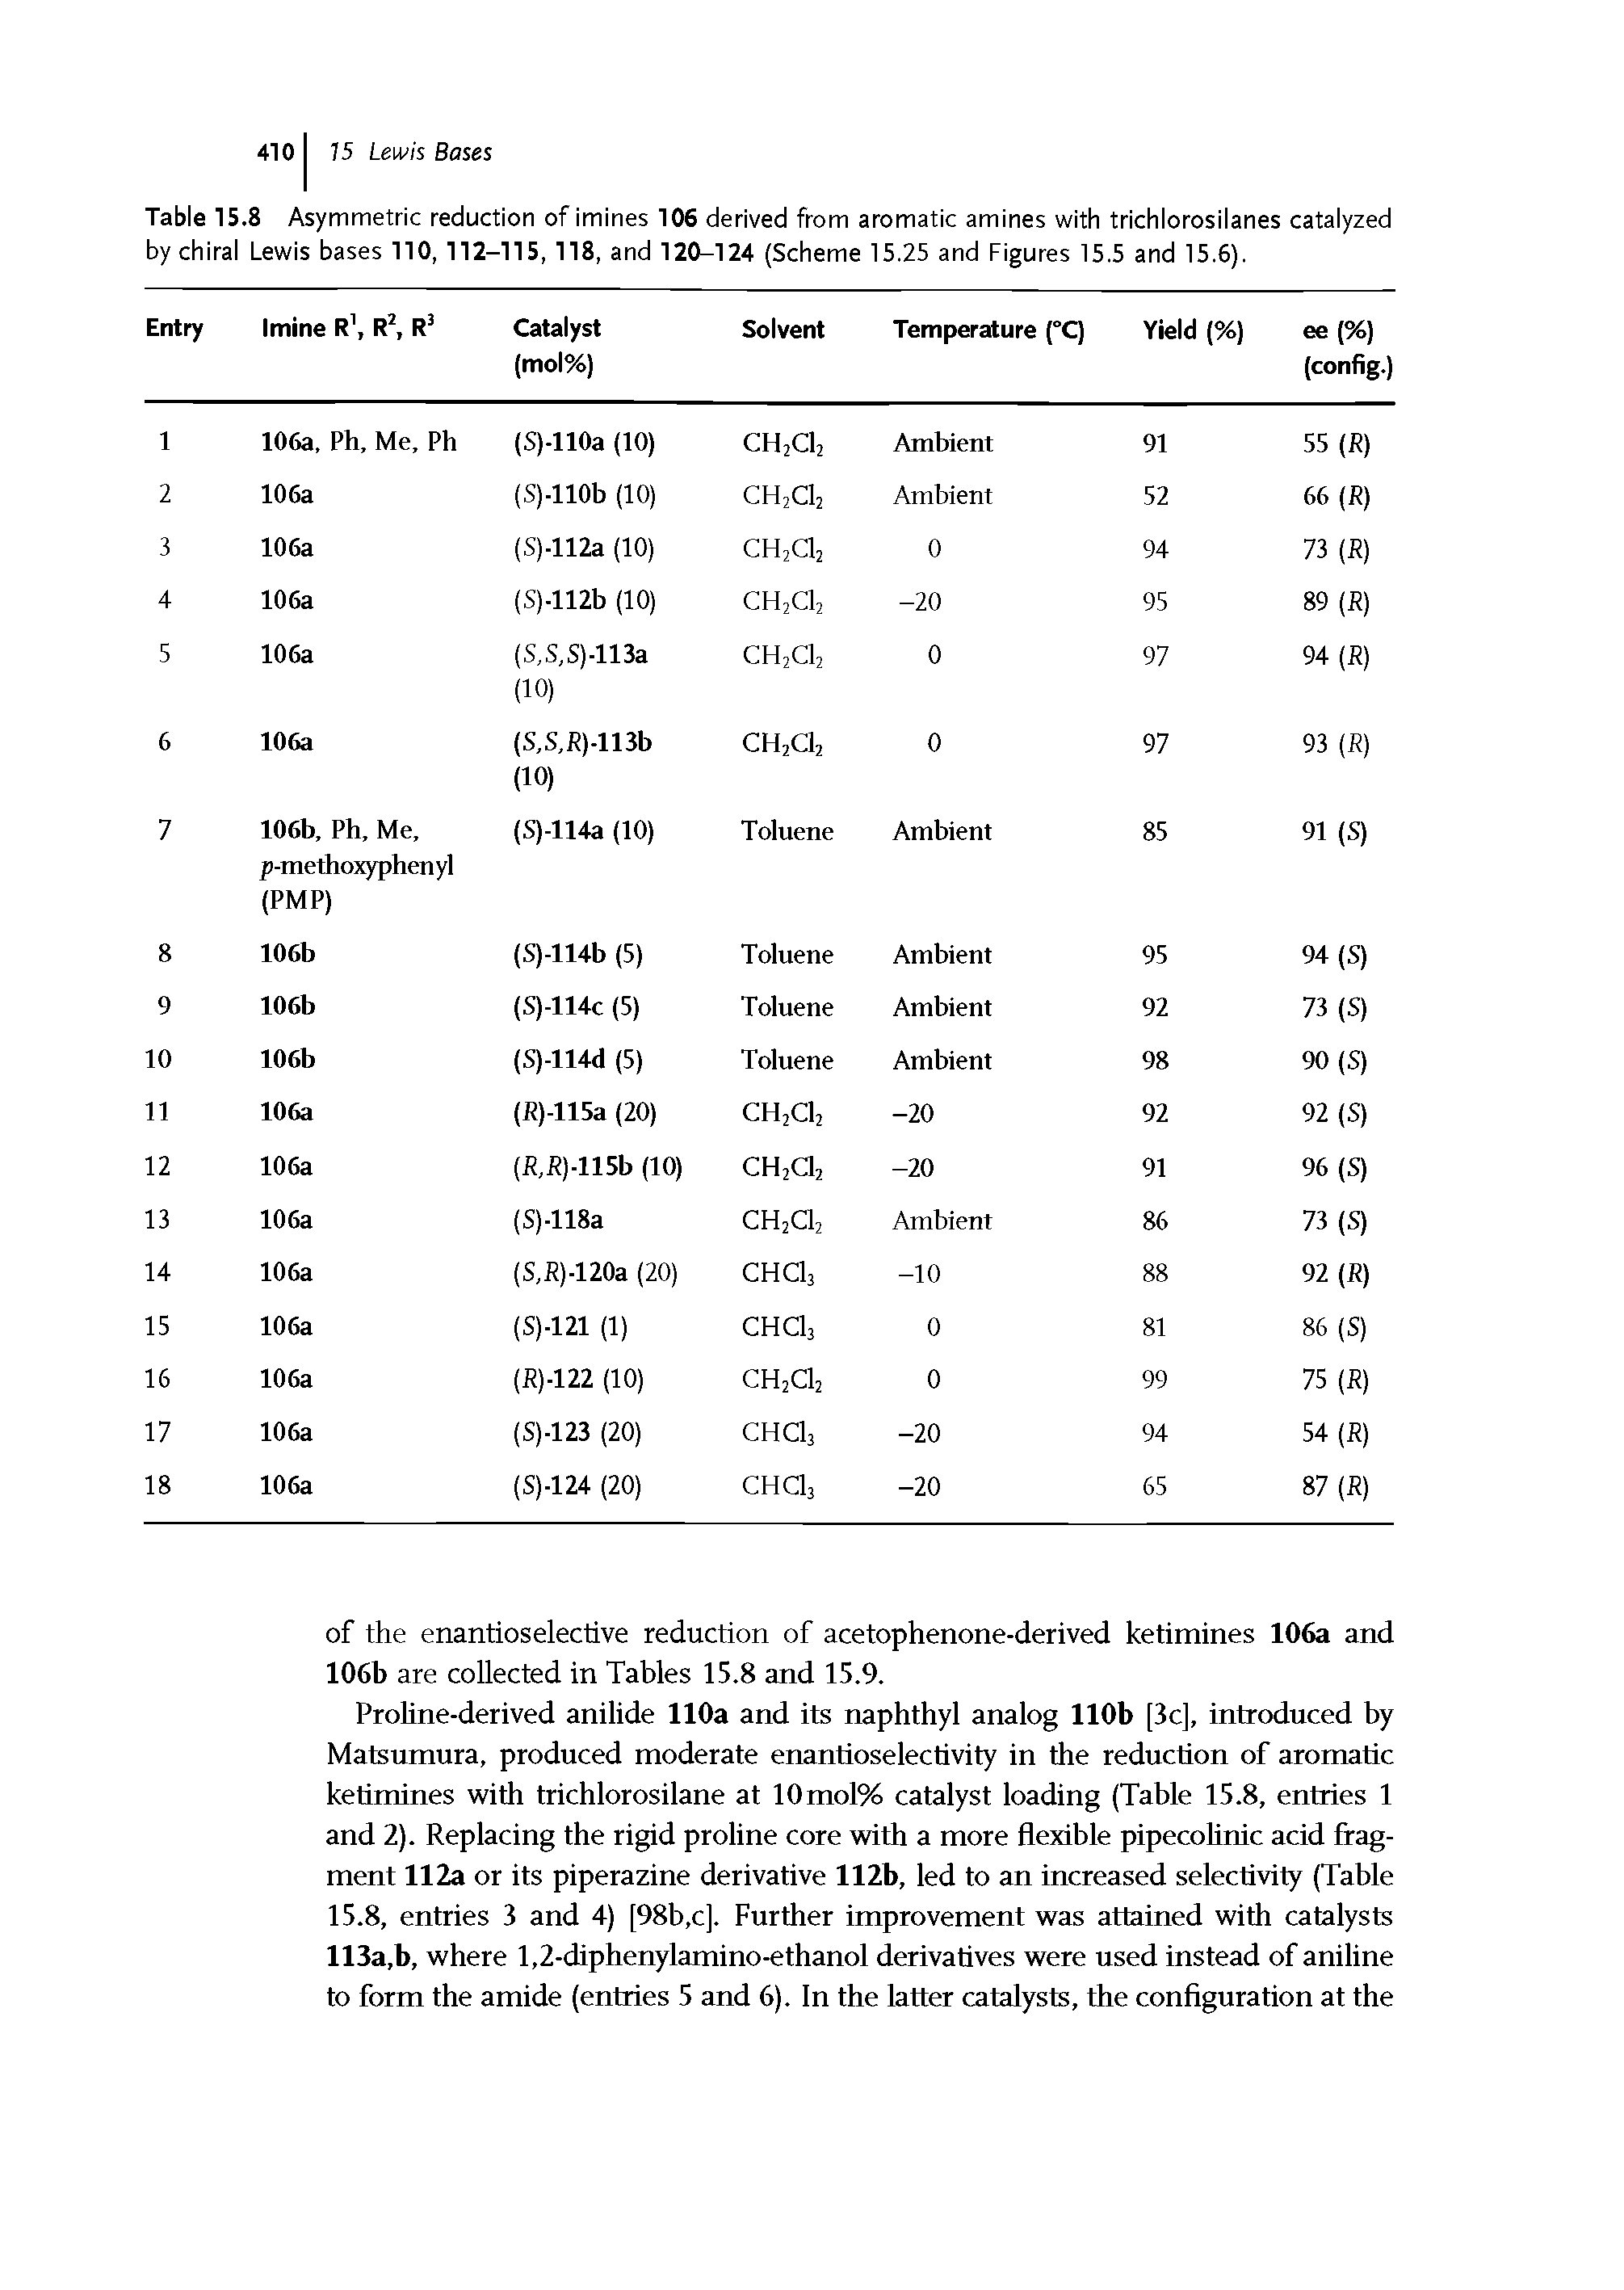 Table 15.8 Asymmetric reduction of imines 106 derived from aromatic amines with trichlorosilanes catalyzed by chiral Lewis bases 110,112-115,118, and 120-124 (Scheme 15.25 and Figures 15.5 and 15.6).